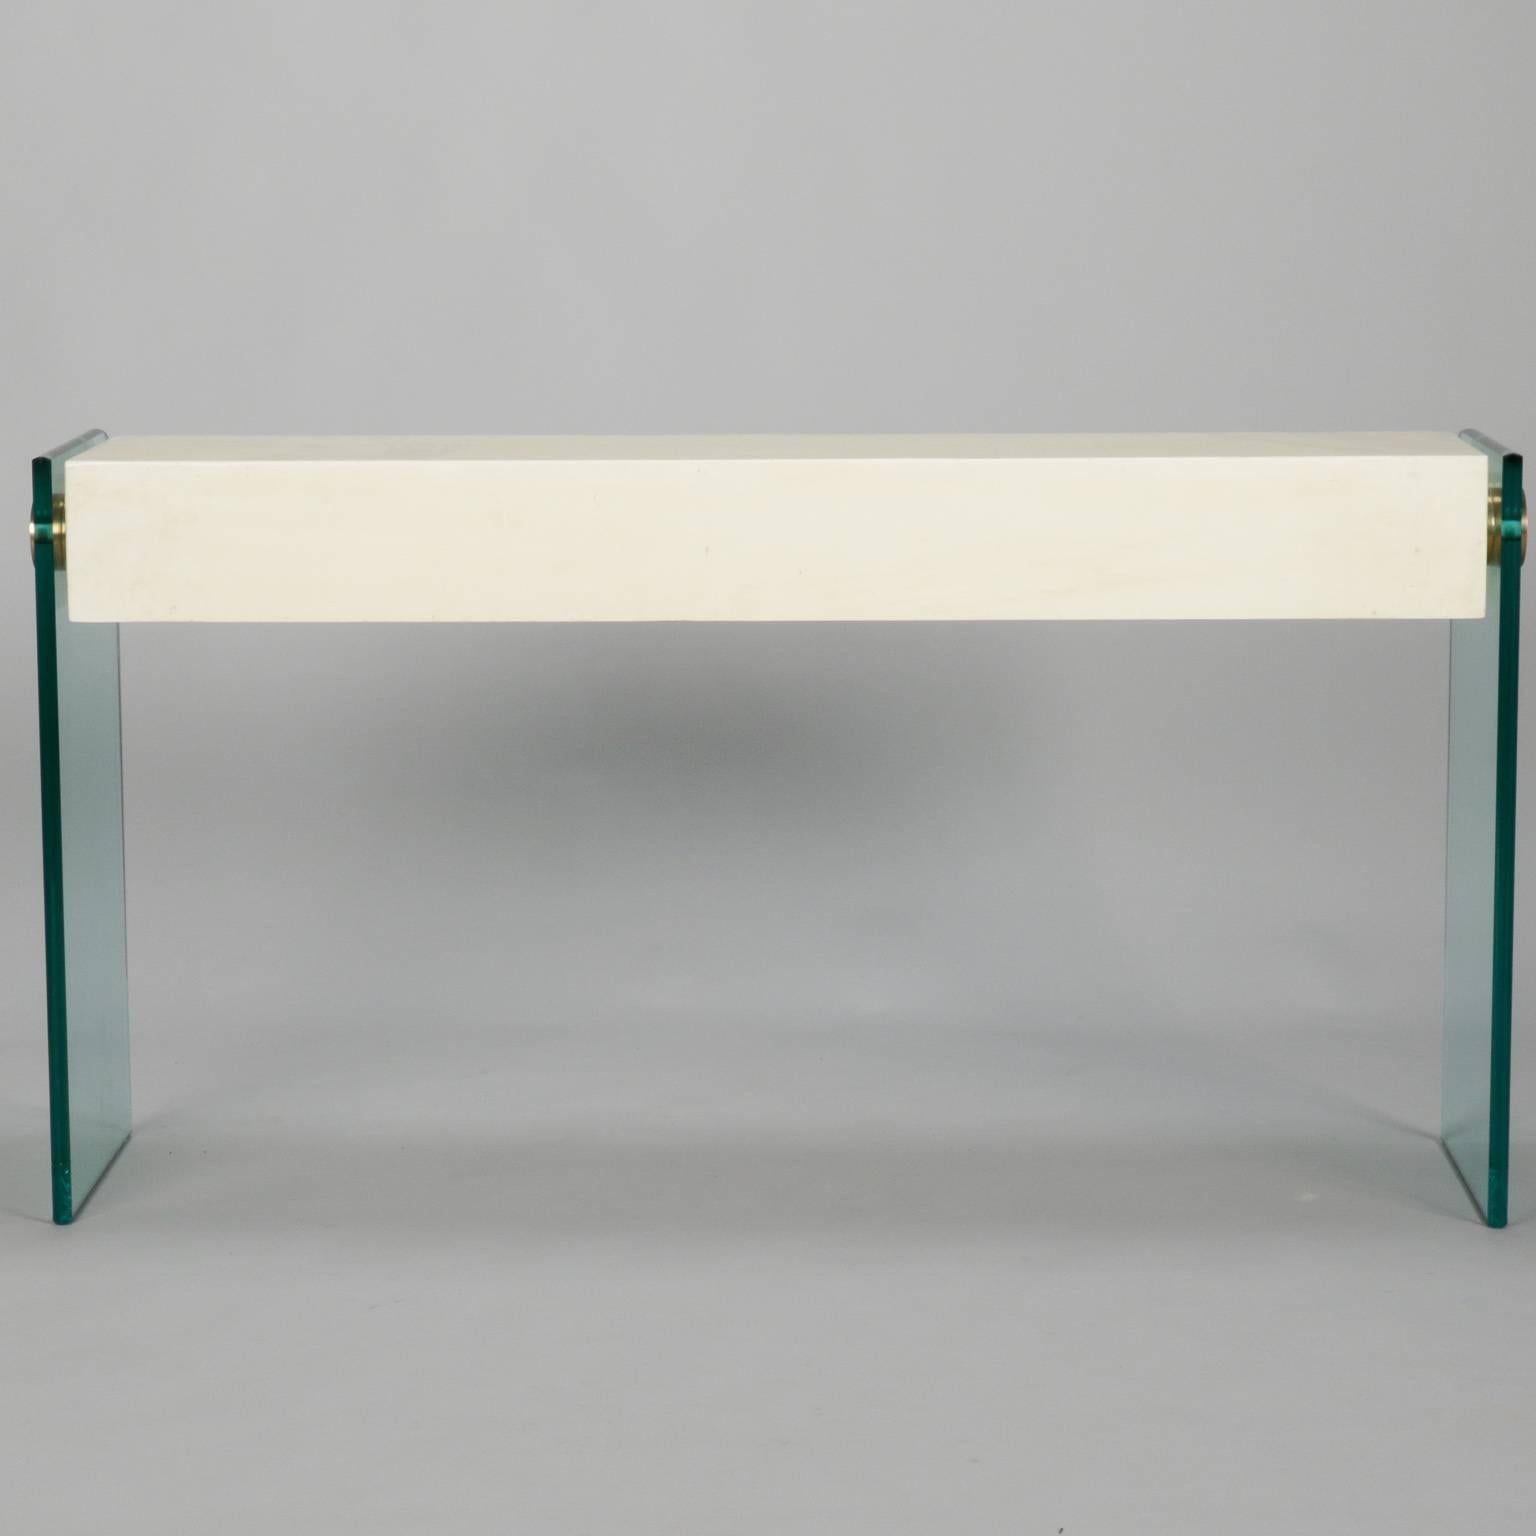 Circa late 1970s pair of modernist style consoles have wood table tops completely covered in bone tiles supported by heavy glass sides/legs and brass disk connectors. Bone tiles form smooth, curved edges and surfaces and have a thick, clear